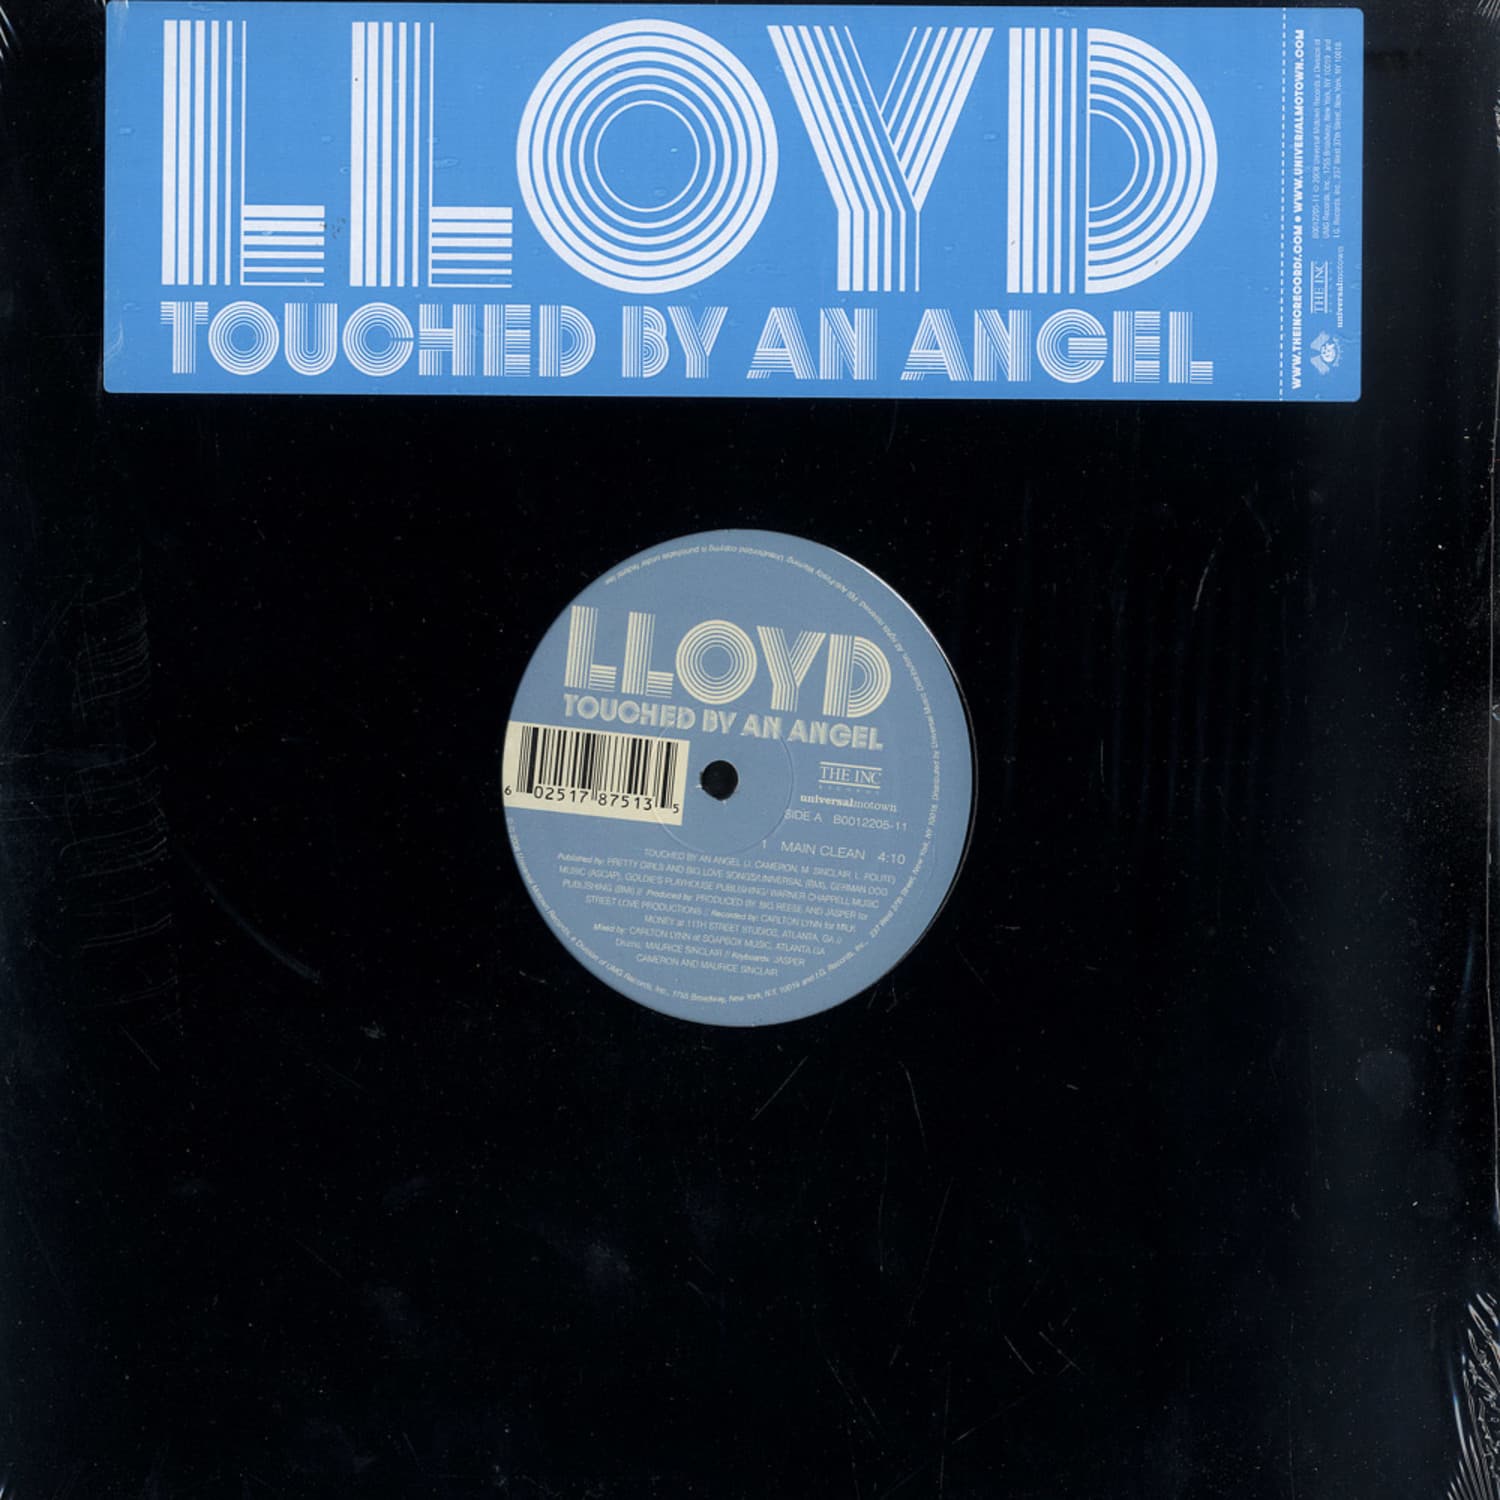 Lloyd - TOUCHED BY AN ANGEL